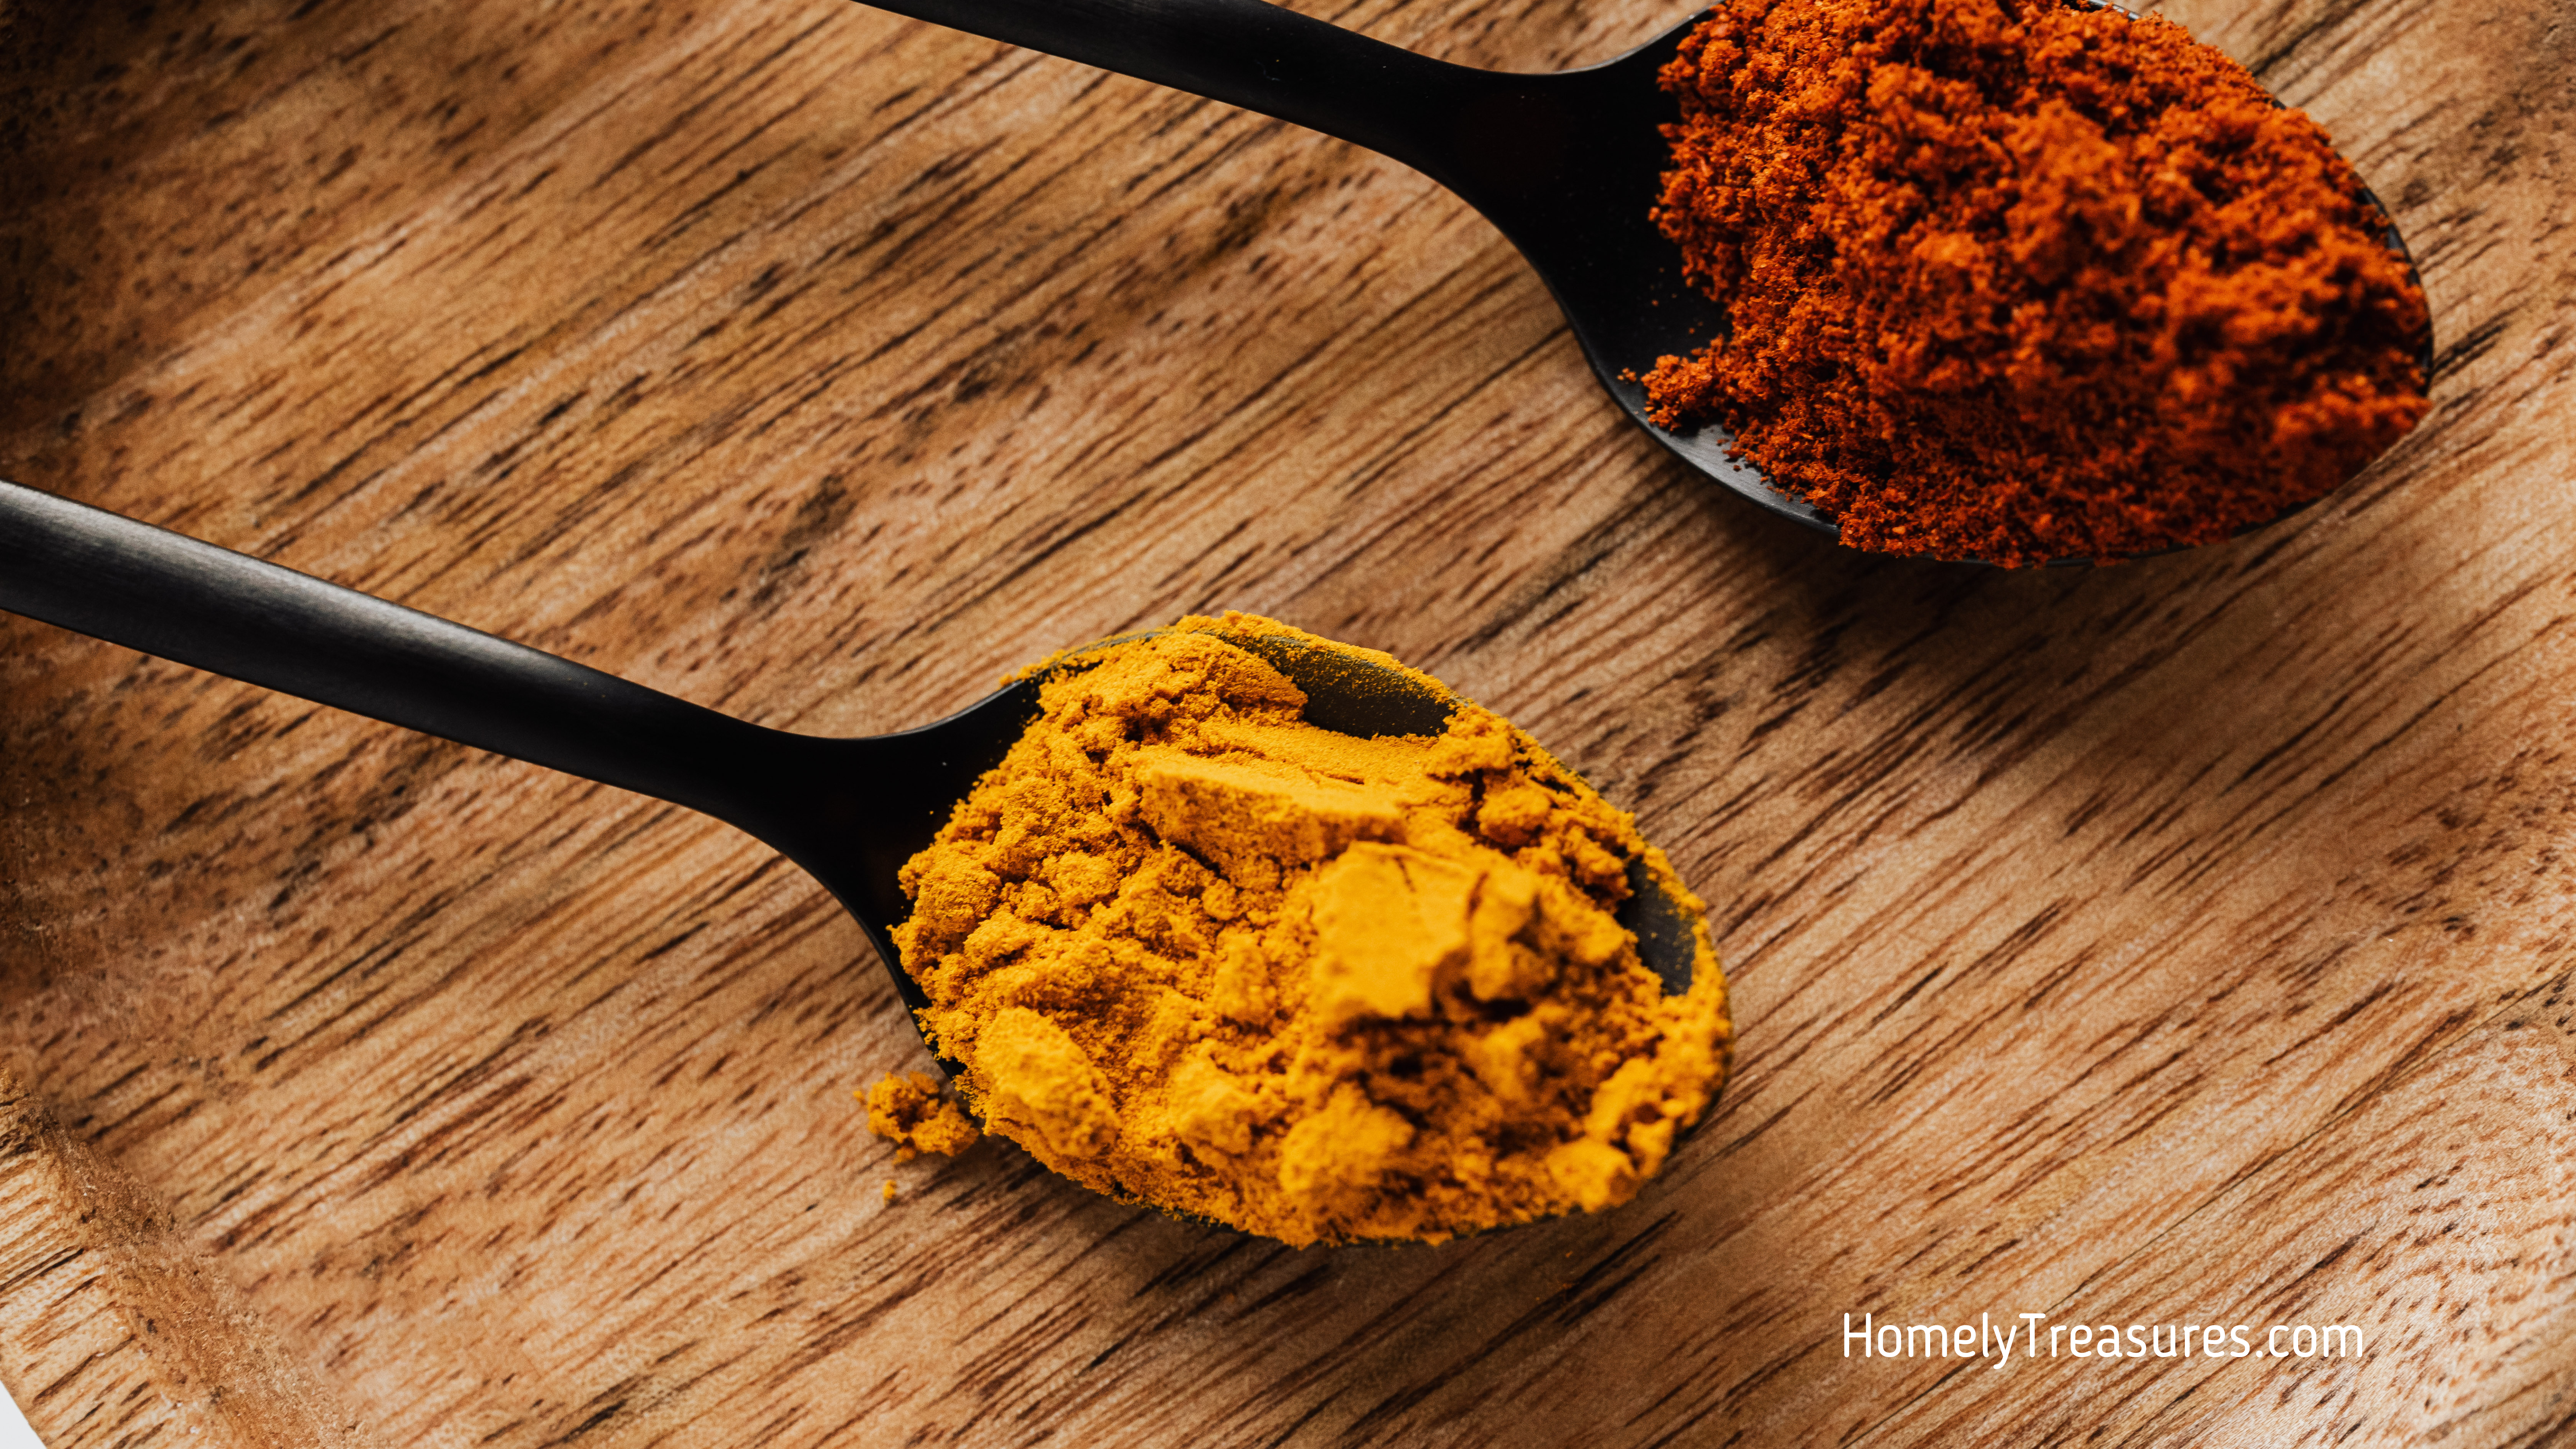 5 Simple Ingredients that add Color to your Food